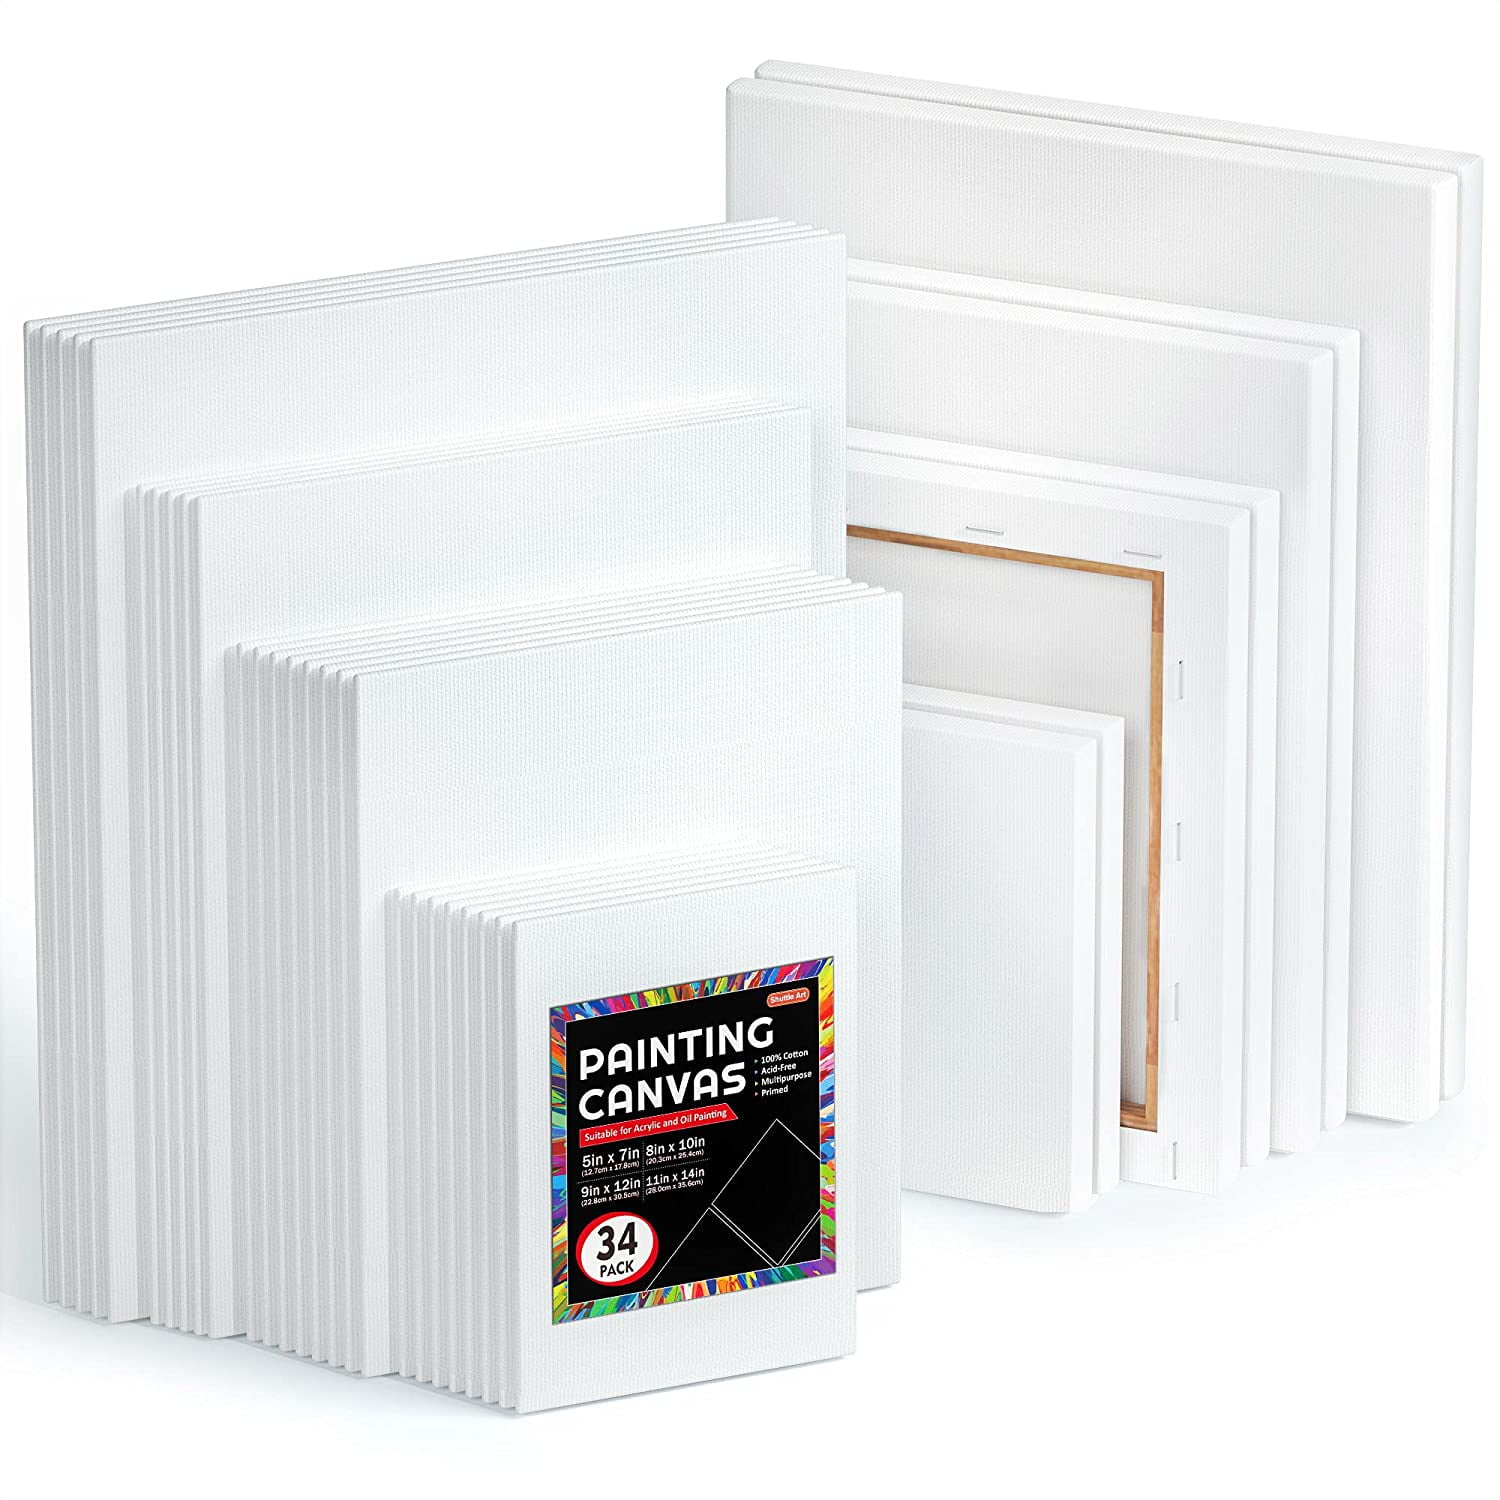 Canvases for Professional Artist 12 x 16 100% Cotton for Acrylic Painting Oil Paint & Wet Water Art Media 5 Packs Blank Canvas Panels Board 30 x 40 cm Hobby Painters & Beginners 